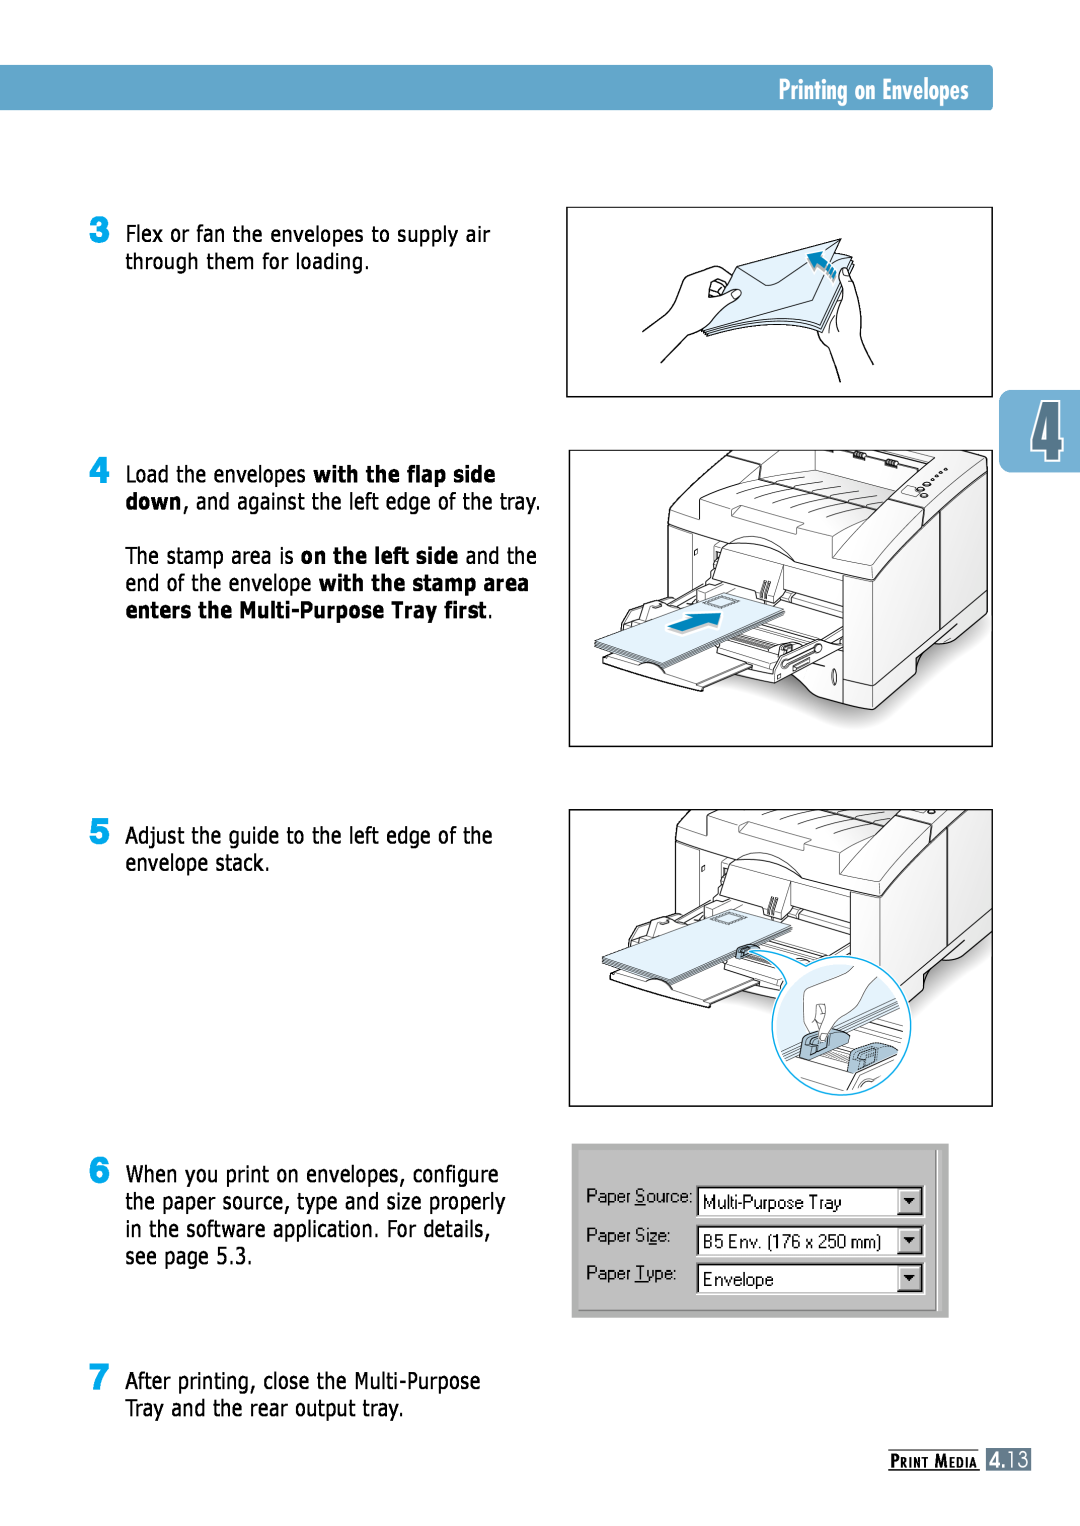 Samsung ML-6060S, ML-6060N manual Printing on Envelopes, Adjust the guide to the left edge of the envelope stack 